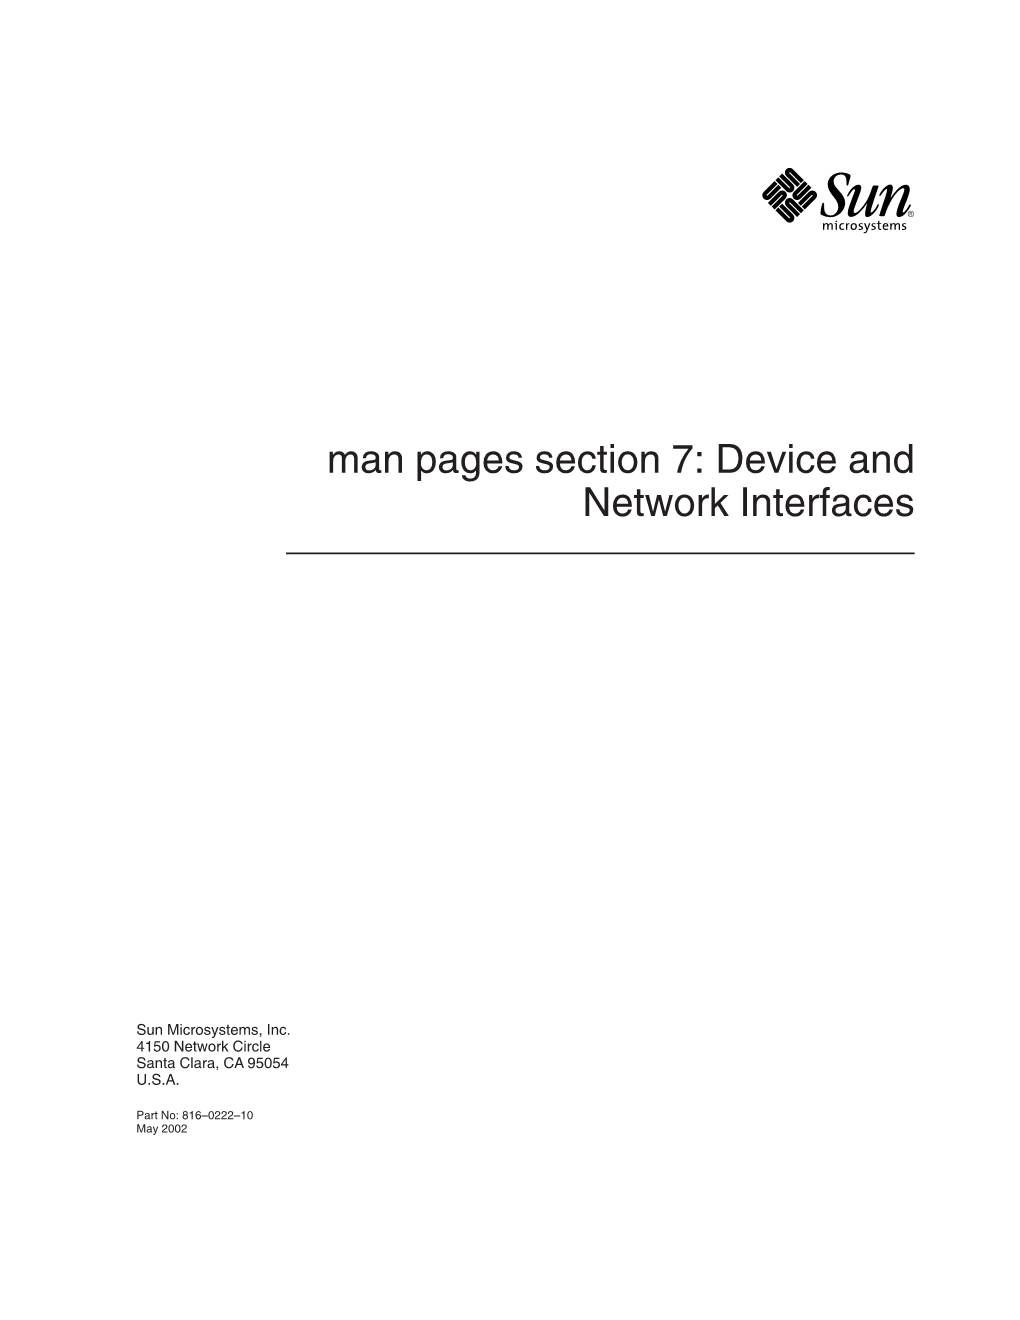 Device and Network Interfaces